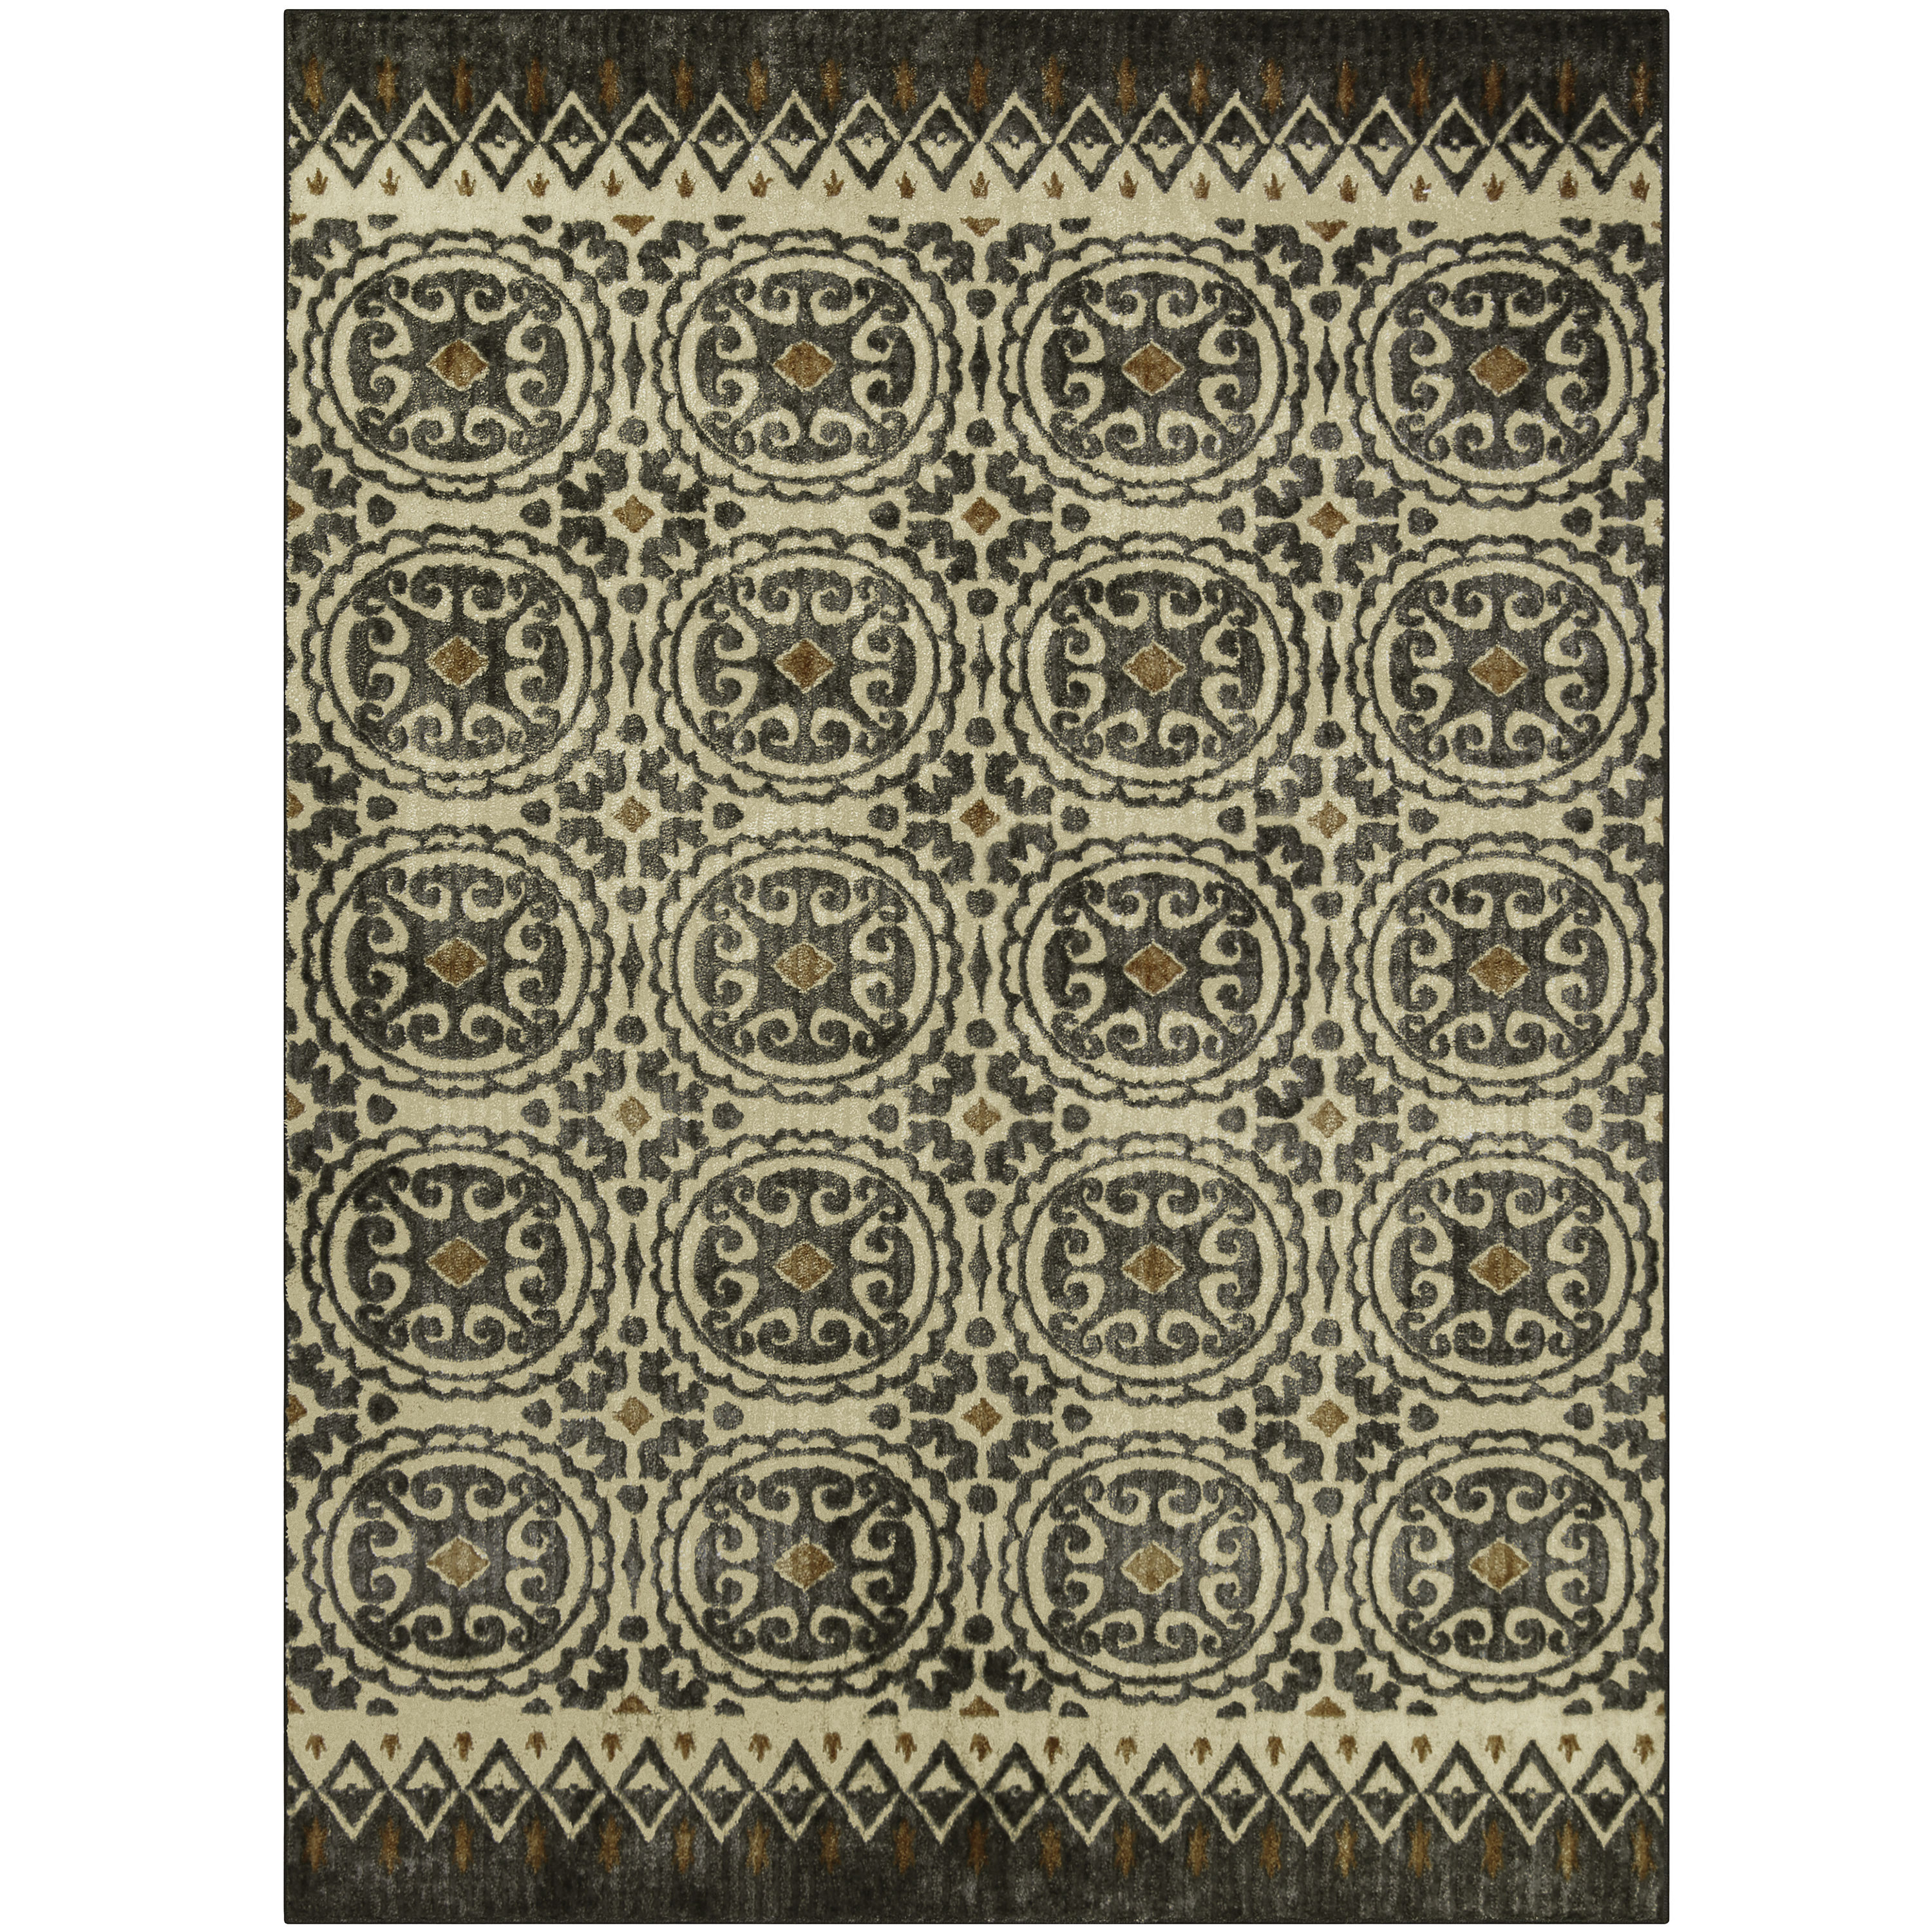 Maples Rugs 5 X 7 Graygold Geometric Area Rug In The Rugs Department